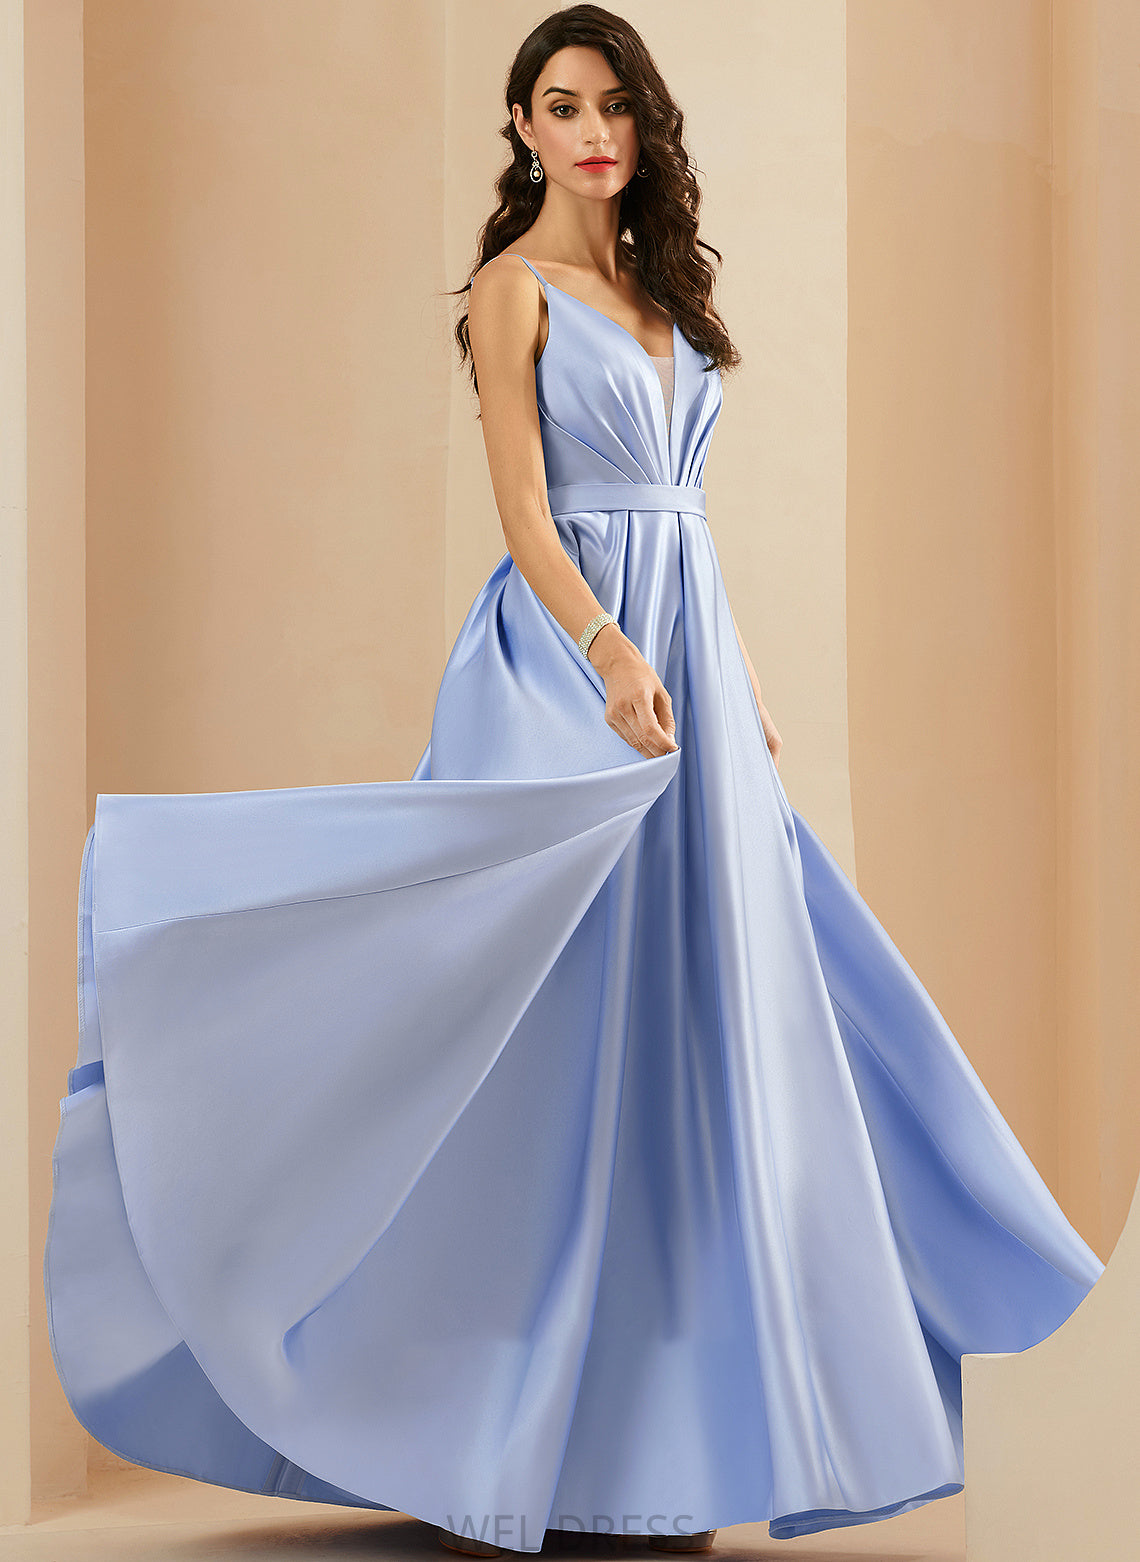 Floor-Length Kaylie V-neck Pockets Ball-Gown/Princess Ruffle Prom Dresses With Satin